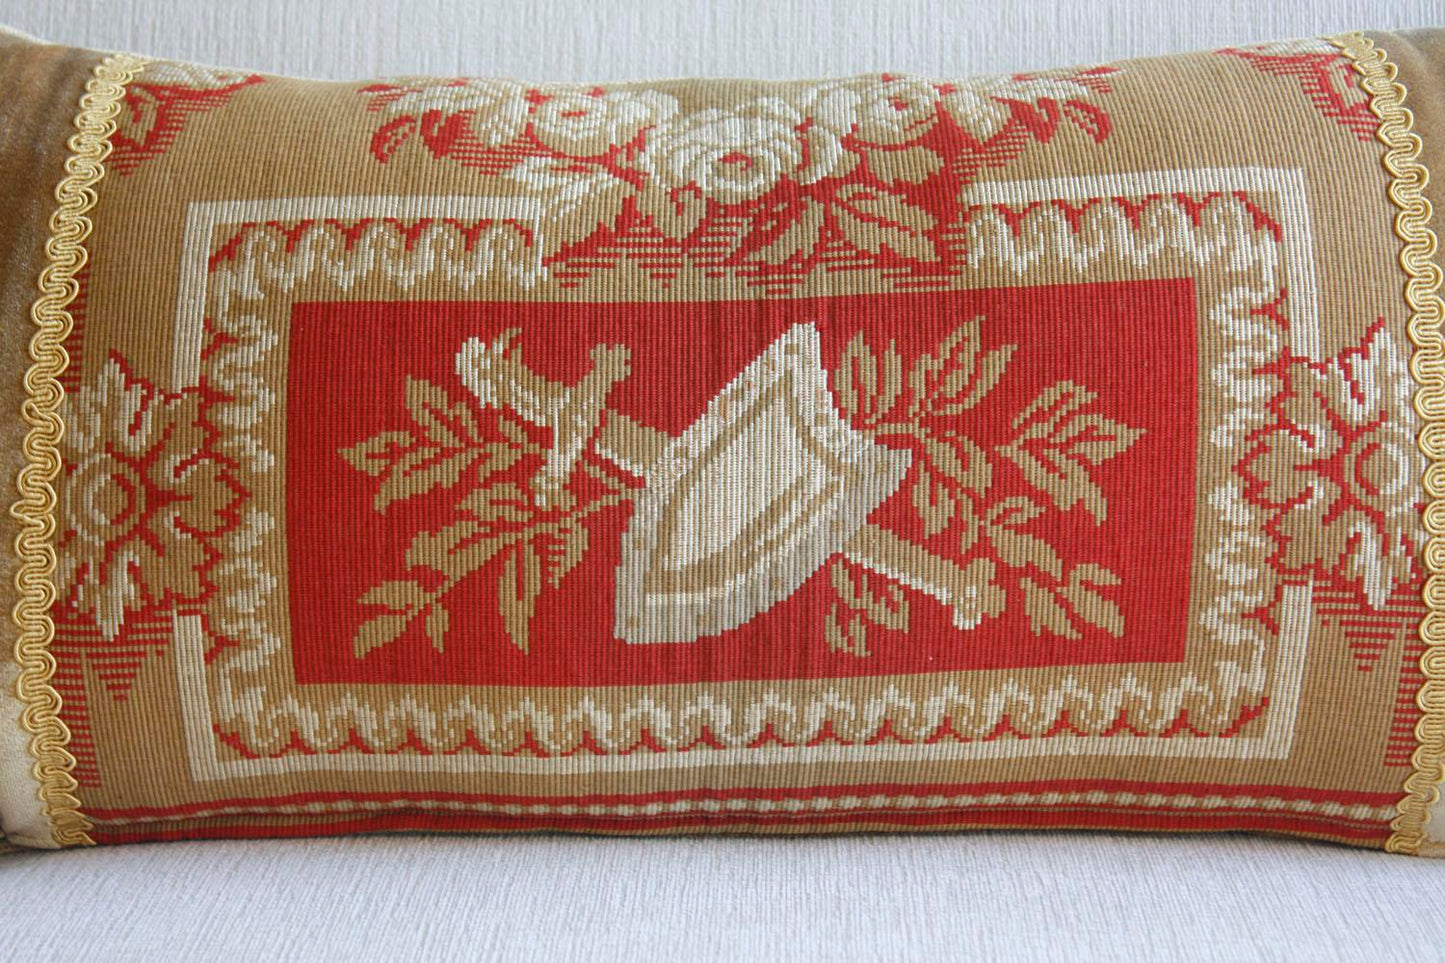 Pair of Neoclassical-style Pillows